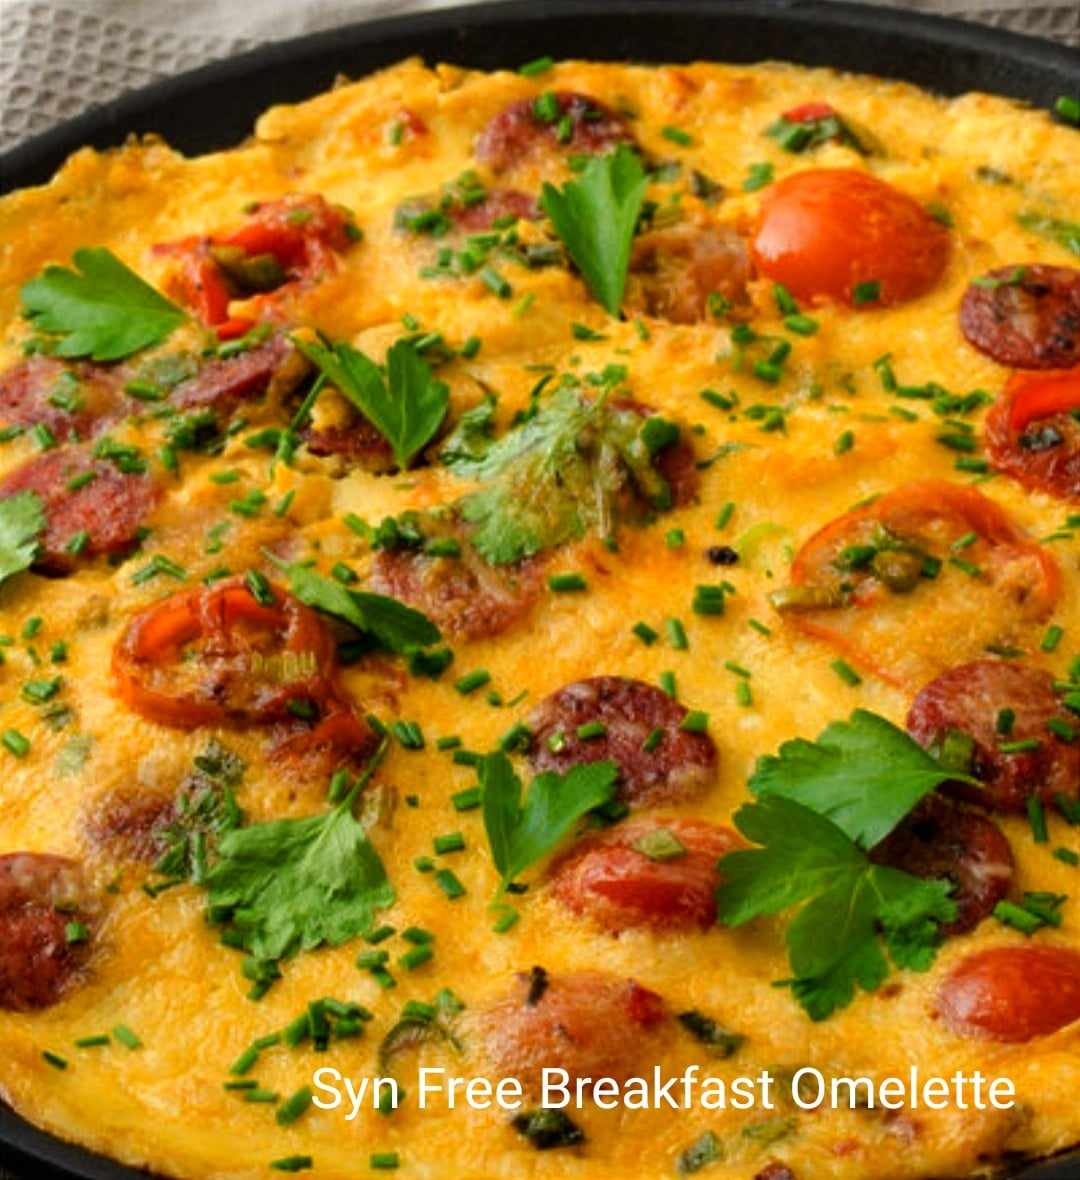 Syn Free Breakfast Omelette Our scrumptious Breakfast Omelette is the perfect way to start the day!